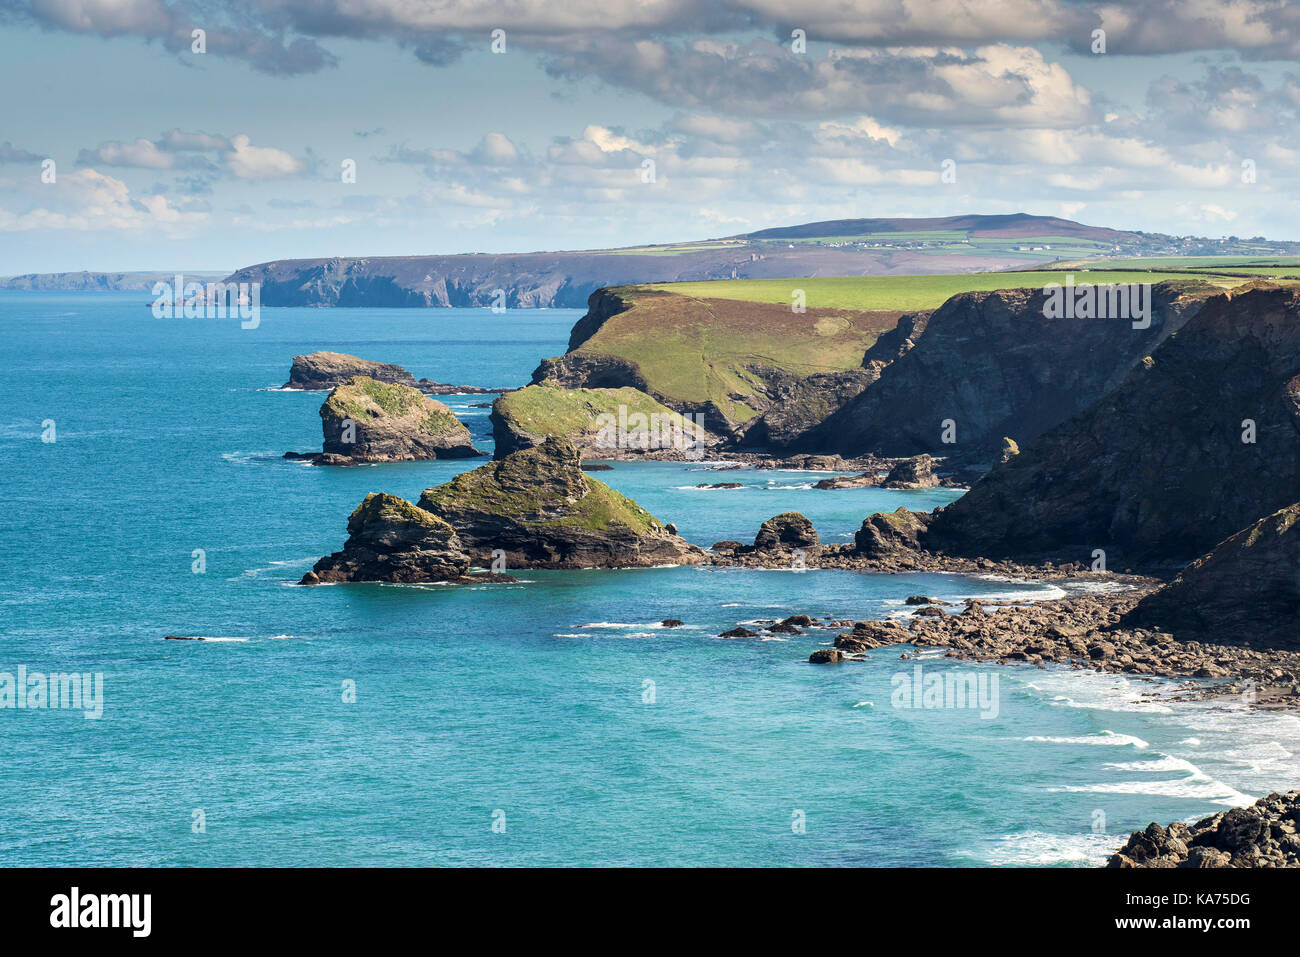 Islands off the coast of North Cornwall. Crane Islands in the foreground and Samphire Island in the background. Stock Photo